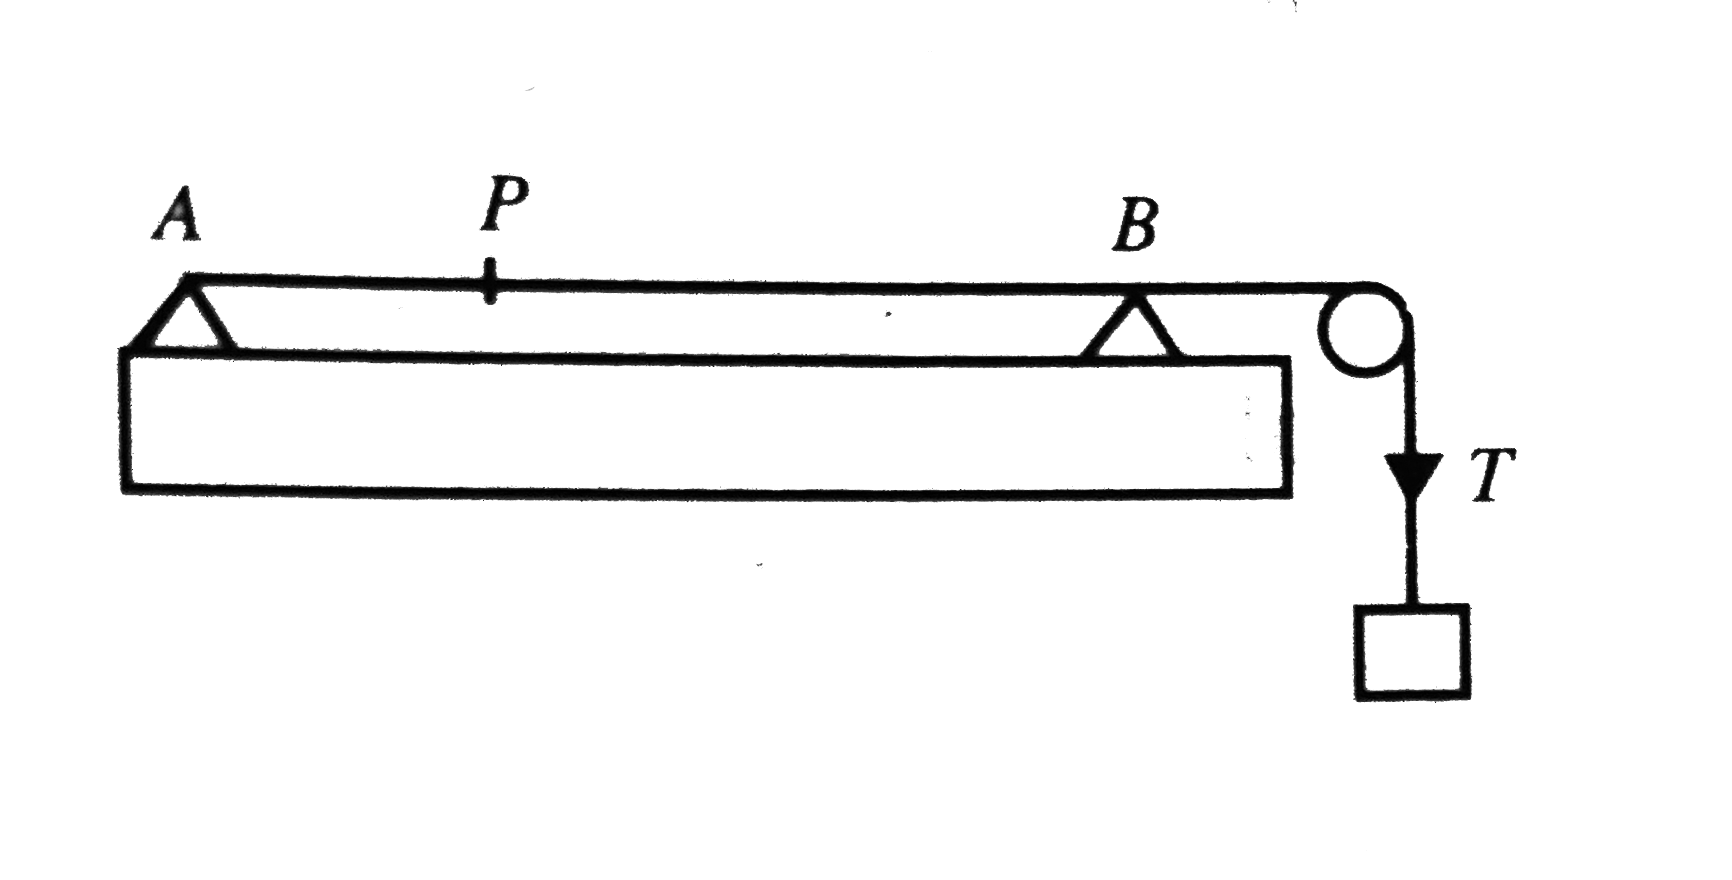 A sonometer strings AB of length  1m is stretched by a load and the tension T is adjusted so that the string resonates to a frequency of 1 kHz. Any point P of the wire may be held fixed by use of a movable bridge that can slide along the base of sonometer.